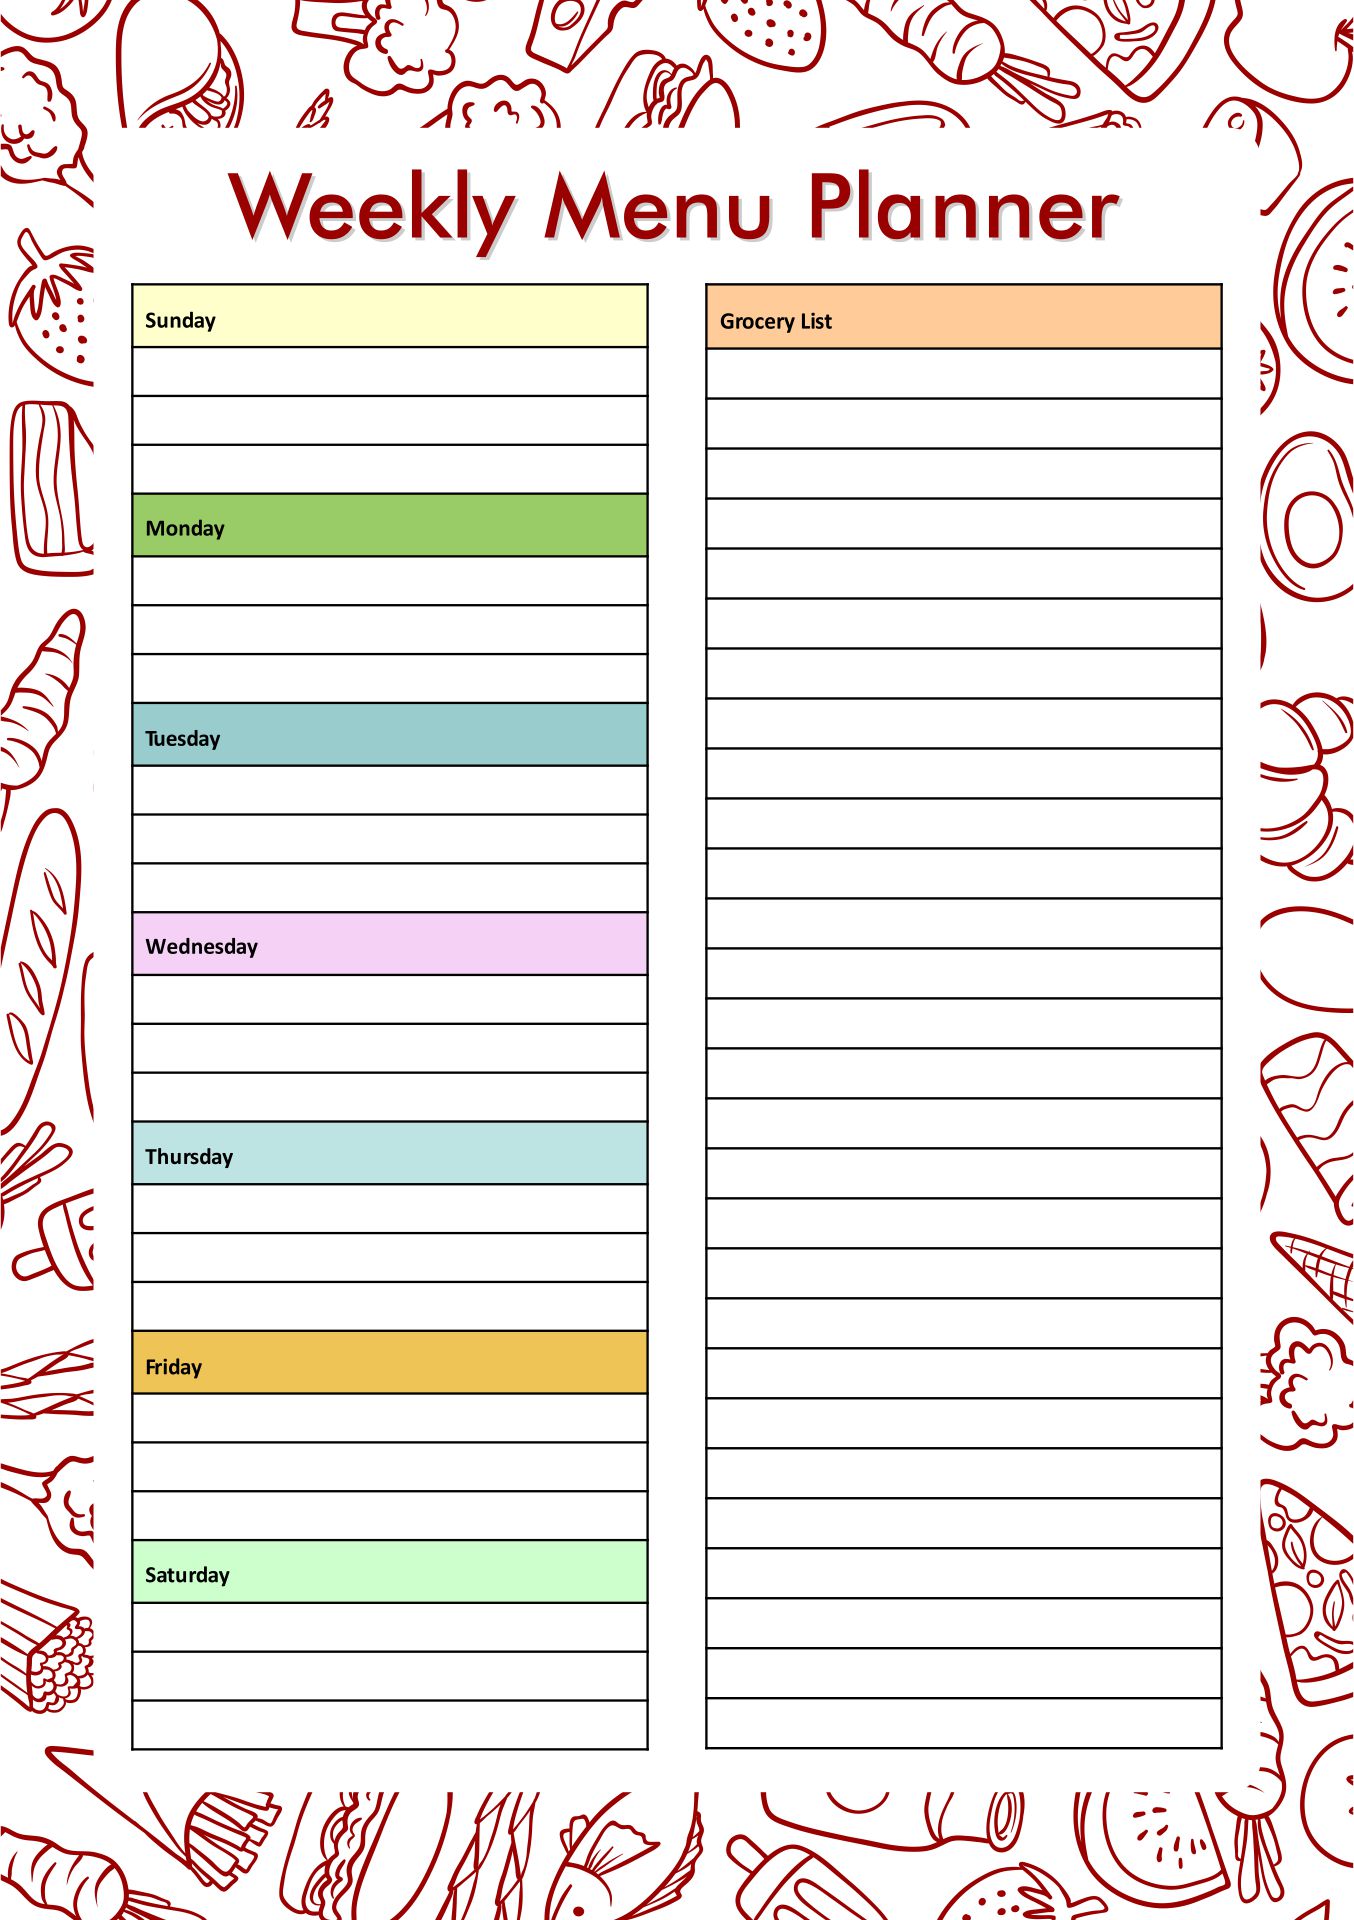 6-best-images-of-free-printable-meal-planner-calorie-charts-low-carb